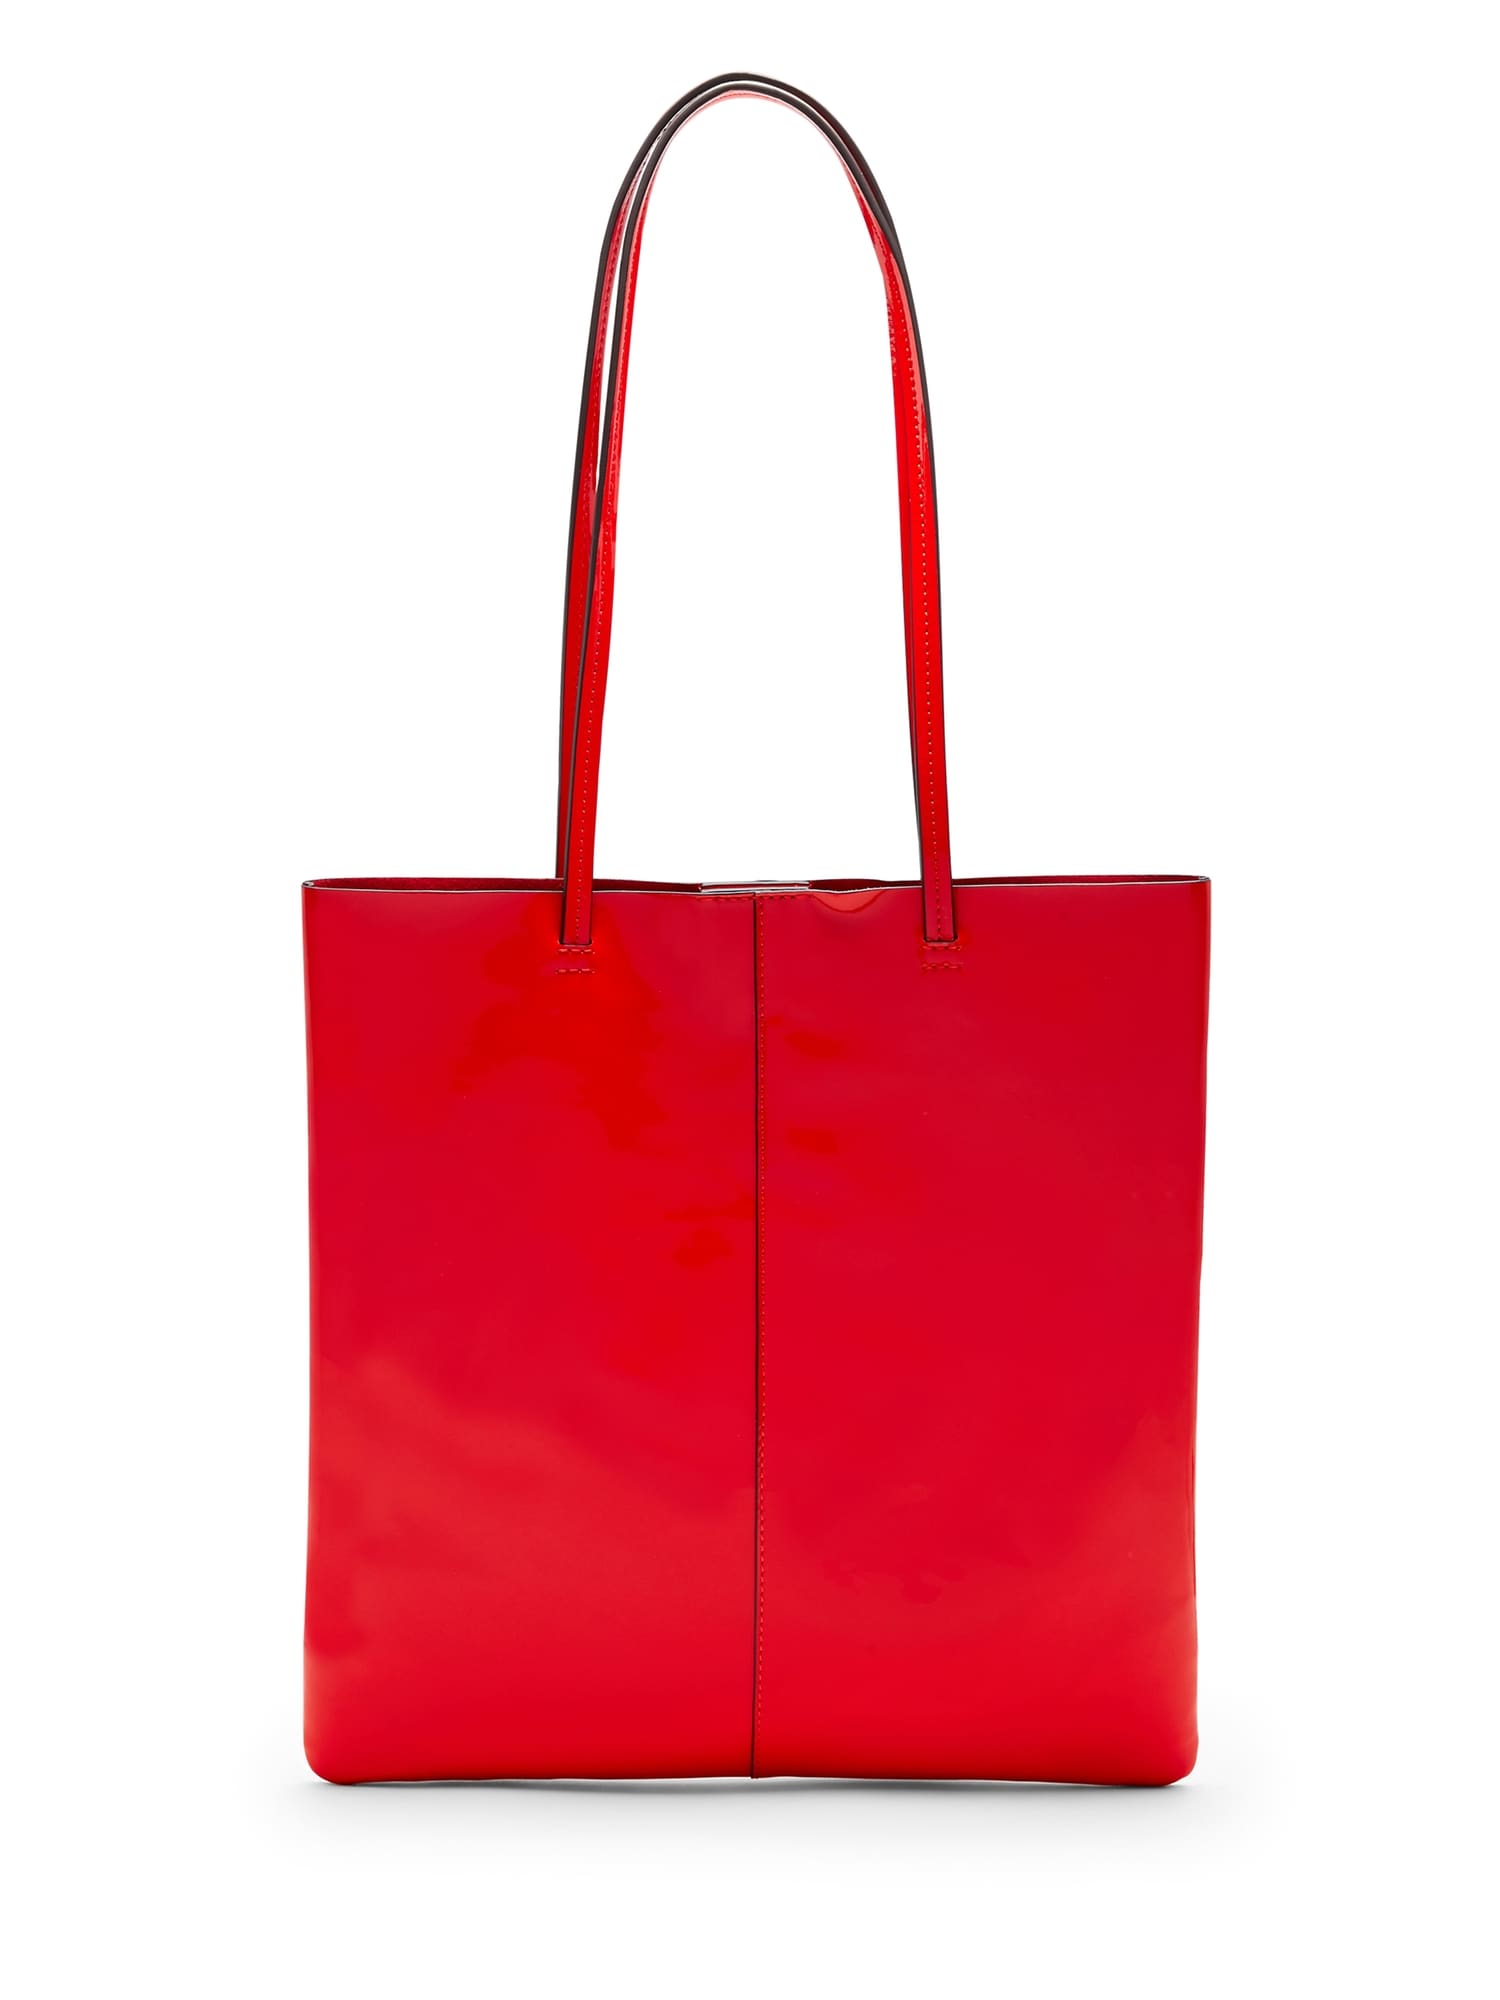 Patent Leather Effortless Tote